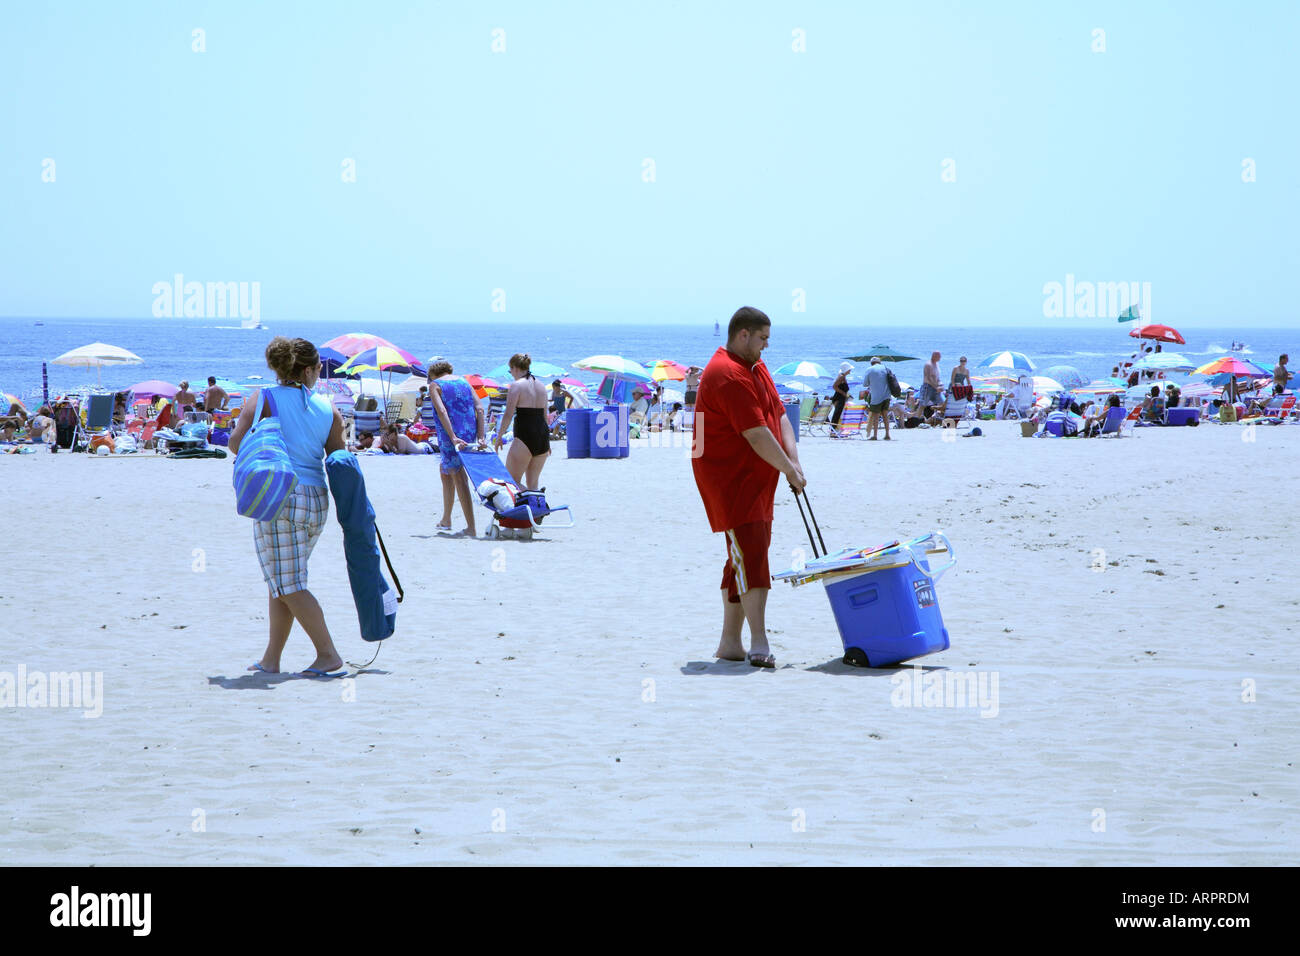 Four people dragging things across sand to join the throng concentrated in narrow strip next to ocean Stock Photo